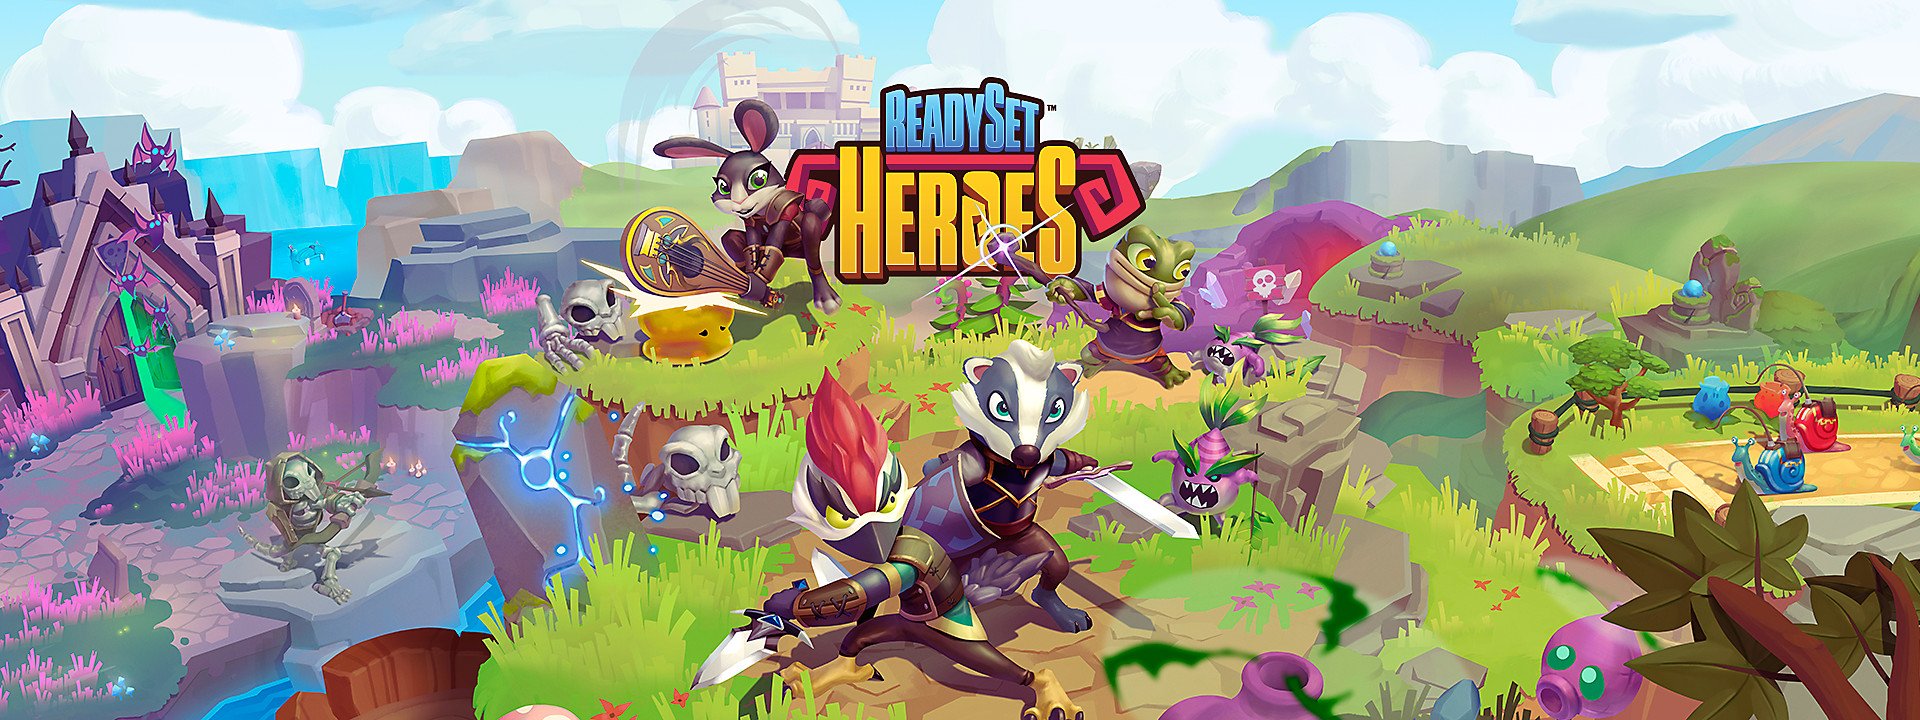 Ready set heroes: jogamos na bgs | readyset heroes normal marquee 01 ps4 us 21mar19 | married games notícias | bgs, playstation 4, robot entertainment | ready set heroes